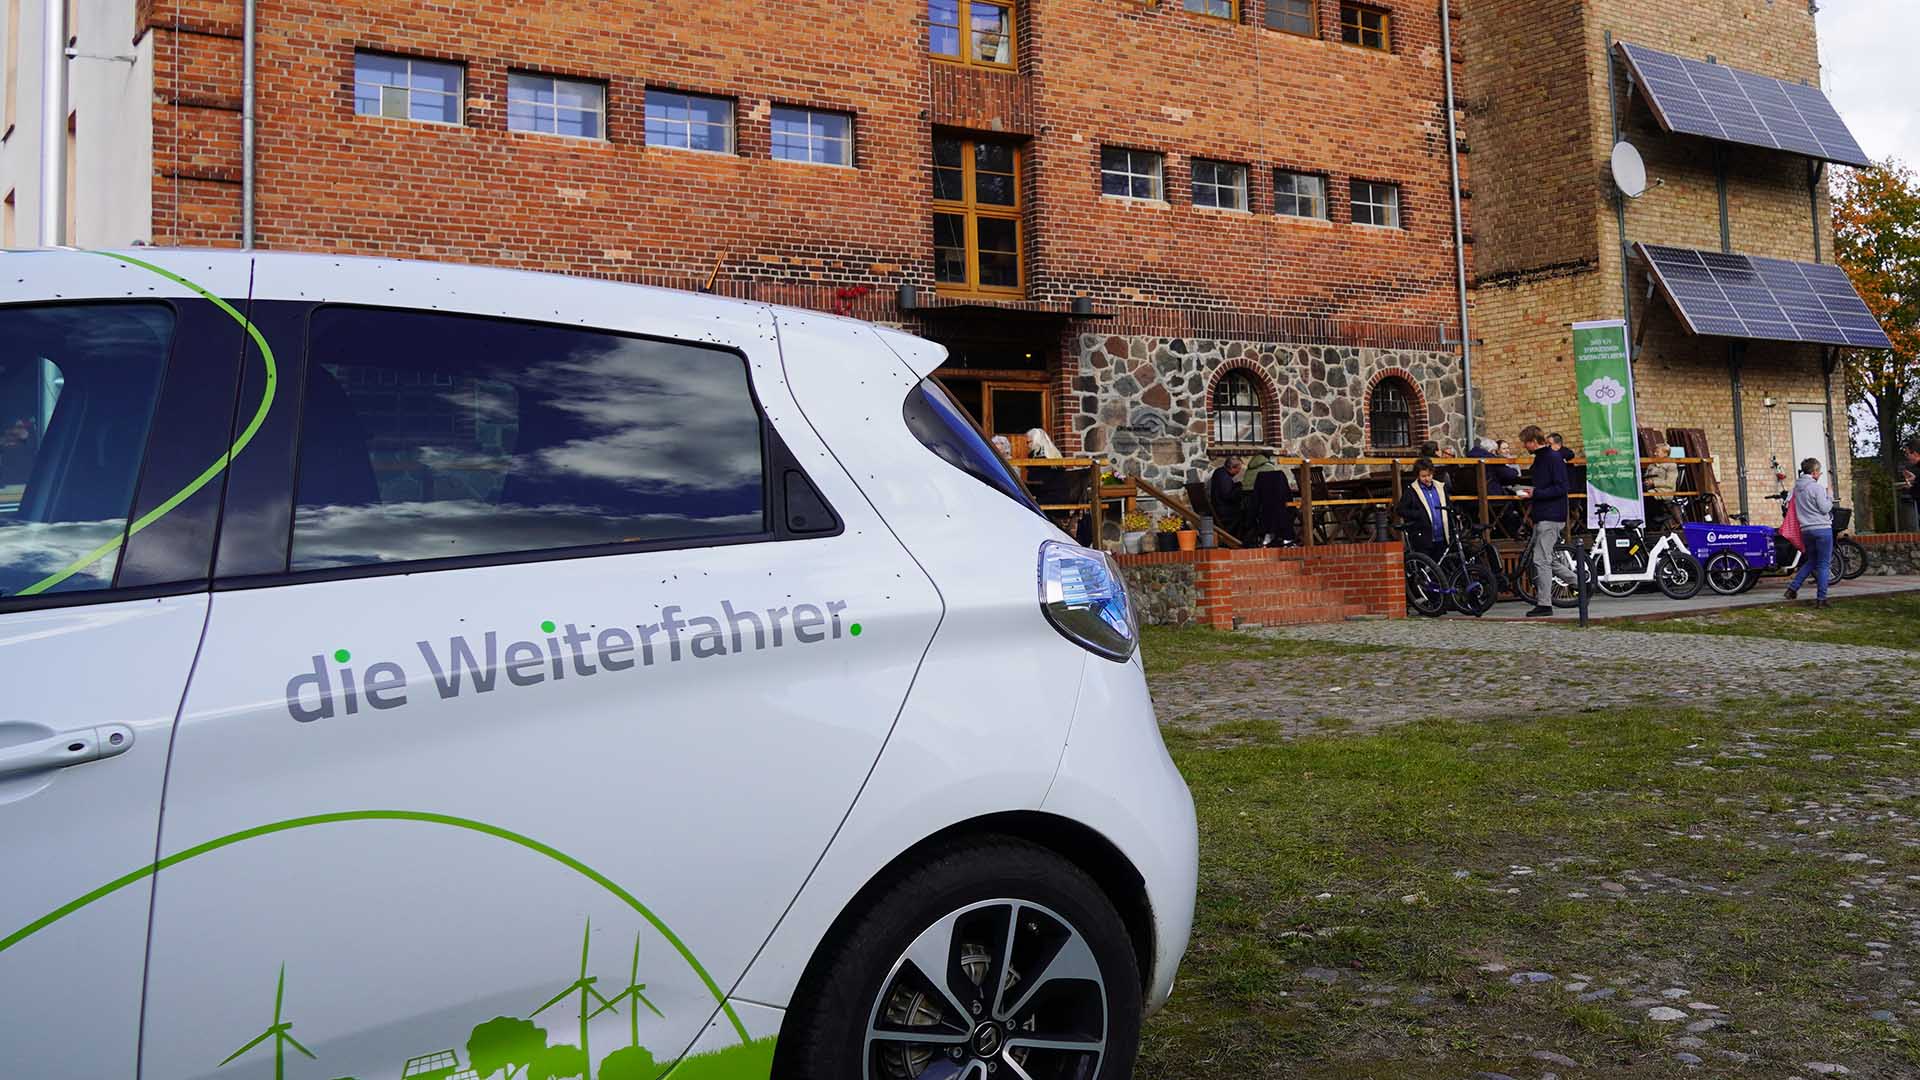 You are currently viewing Workshop 2: E-Carsharing mit dem Arbeitgeber – gute Idee!